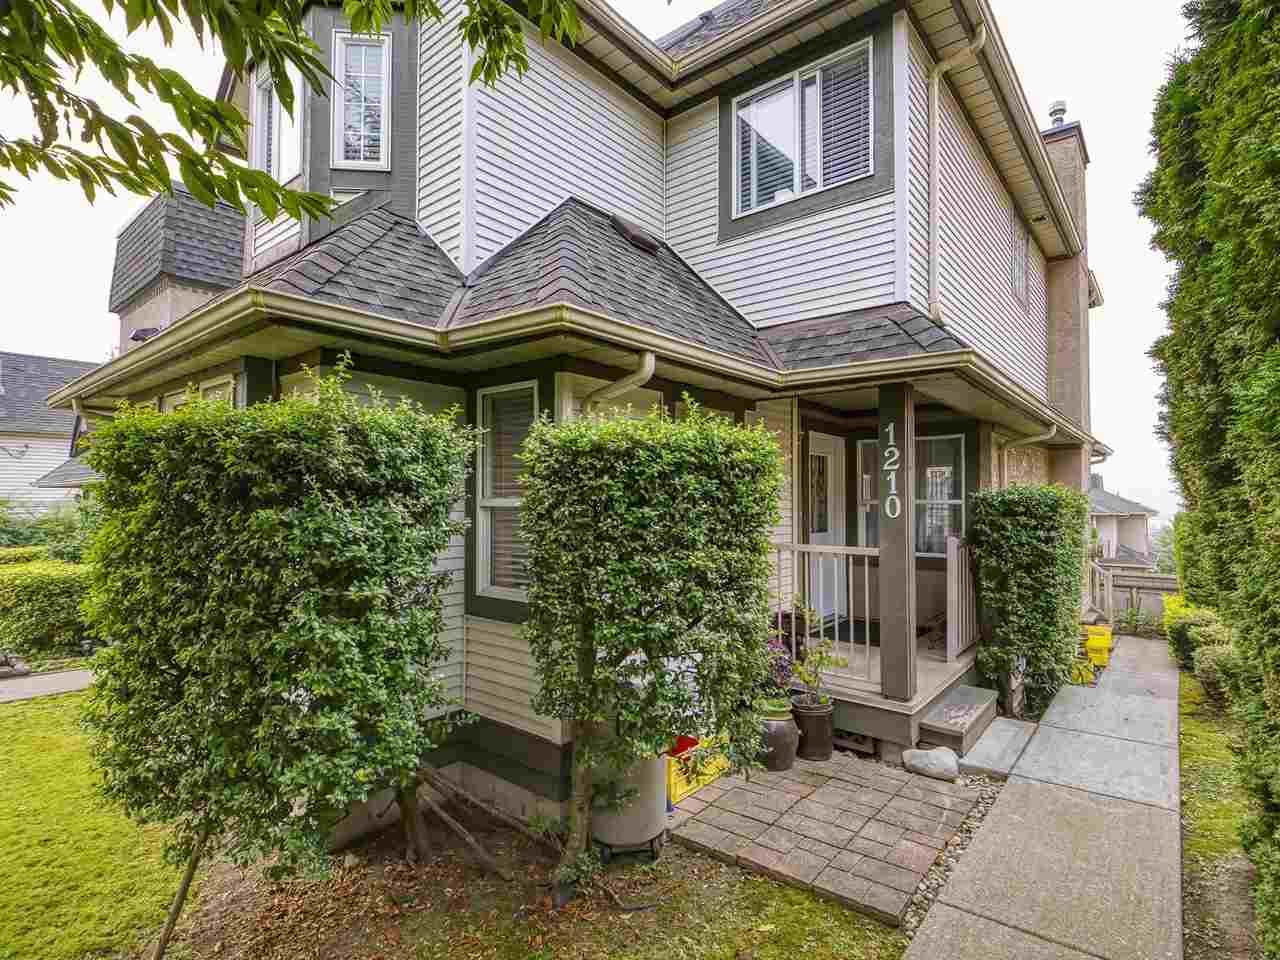 Main Photo: 5 1210 HACHEY AVENUE in Coquitlam: Maillardville Townhouse for sale : MLS®# R2498737